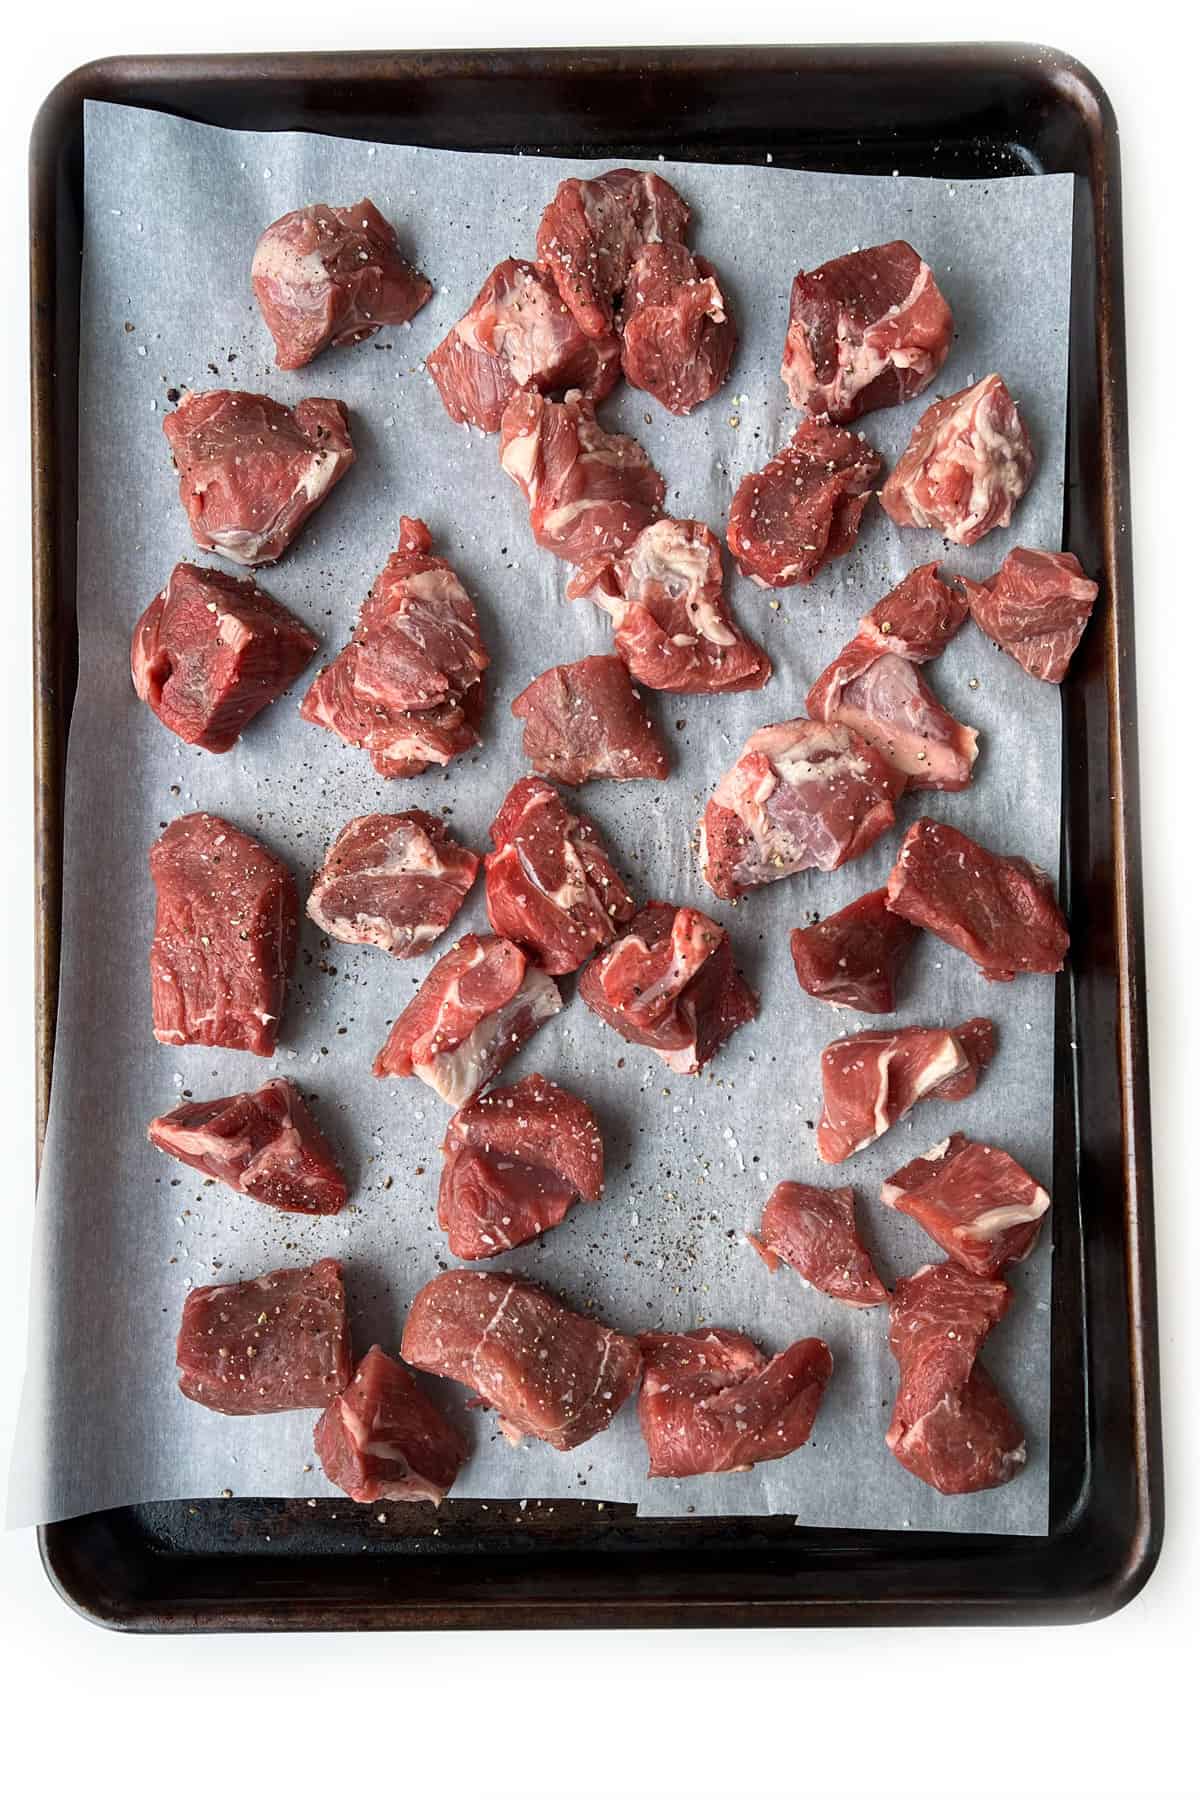 cubes of salted and peppered lamb stew meat spread out on a parchment lined rimmed baking sheet.